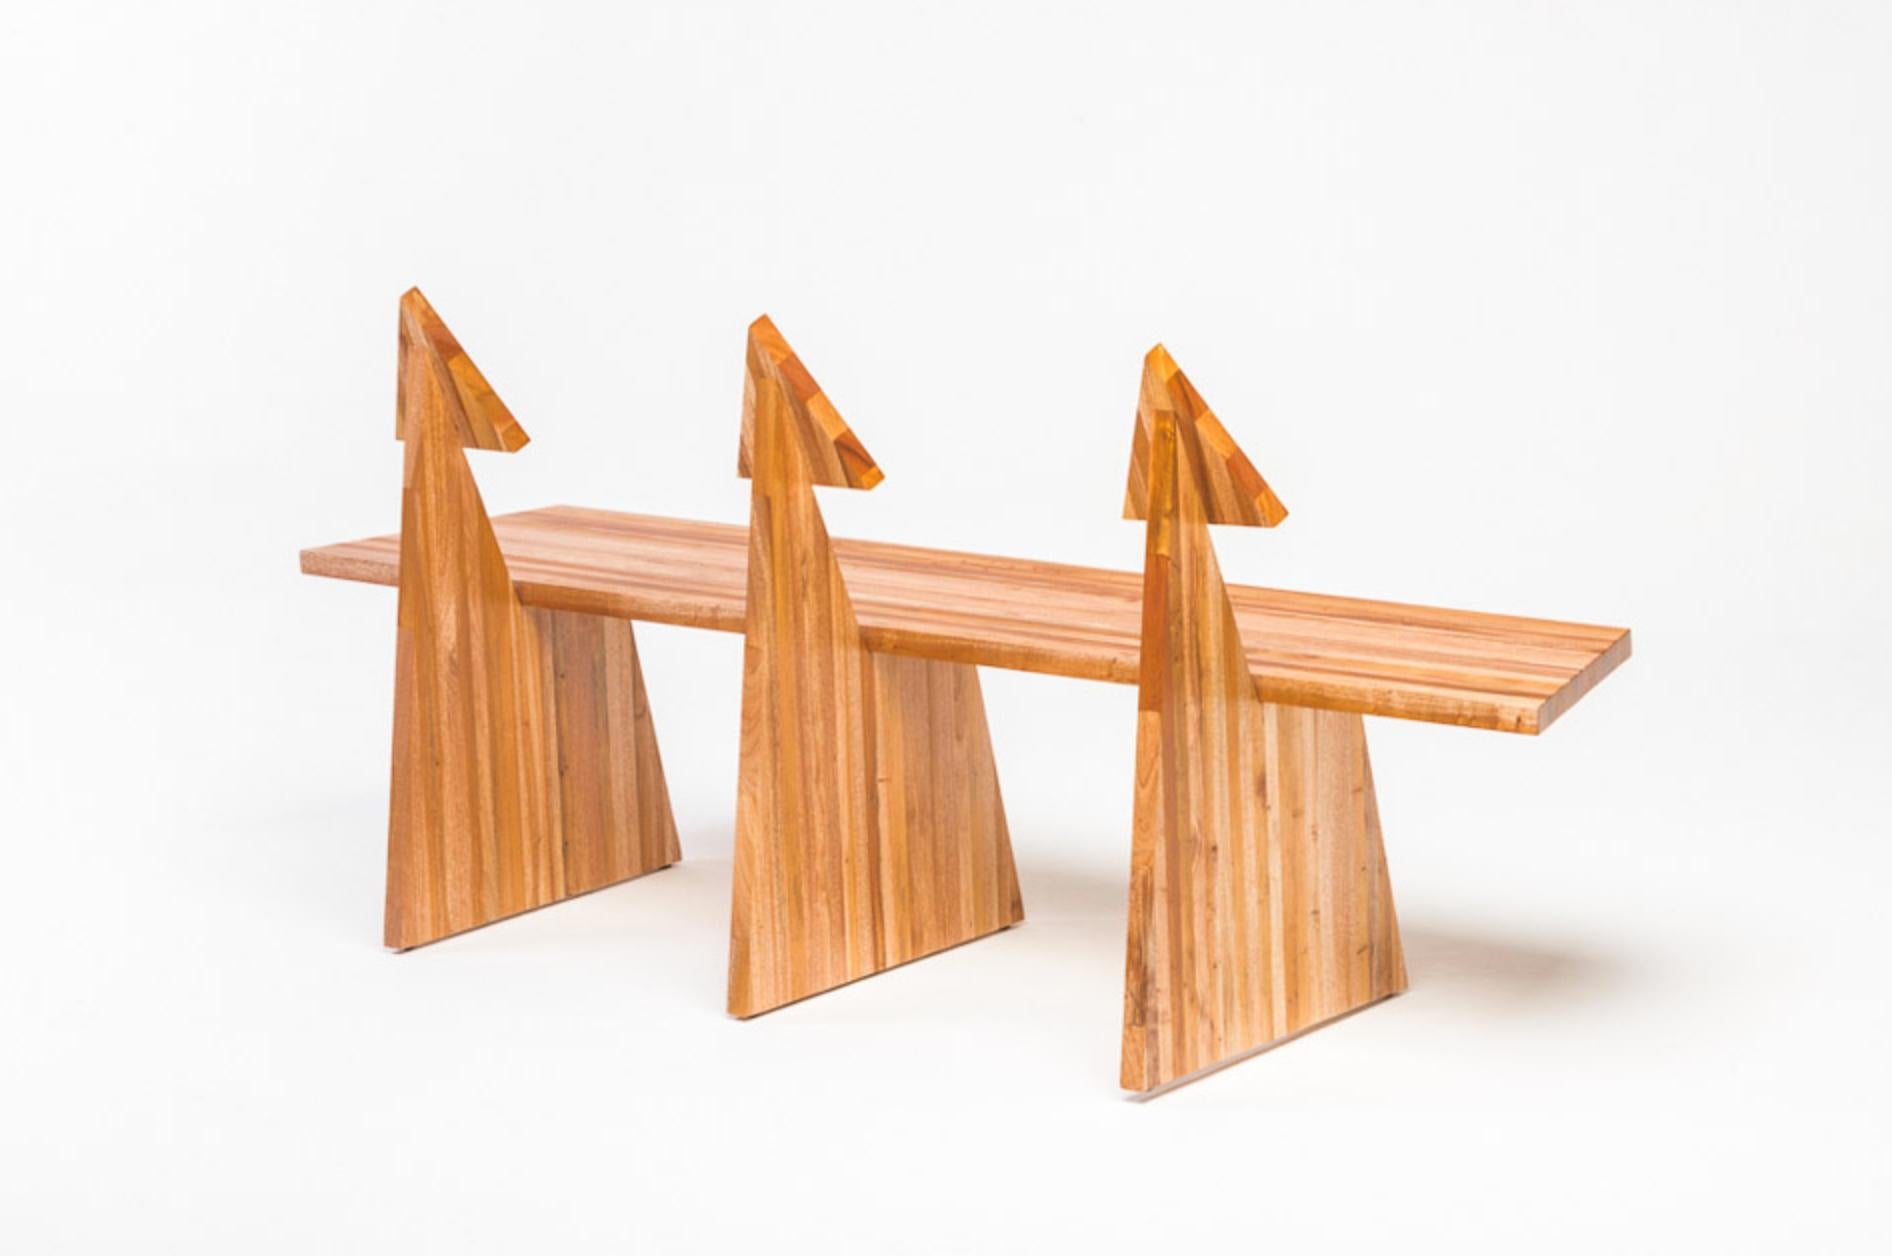 Designed by Juliana Lima Vasconcellos in 2018, the trio bench in made in solid African mahogany wood panels. This bench has a contemporary and simple image, inspired by pure geometric shapes and furniture of pre-modernist architects. The